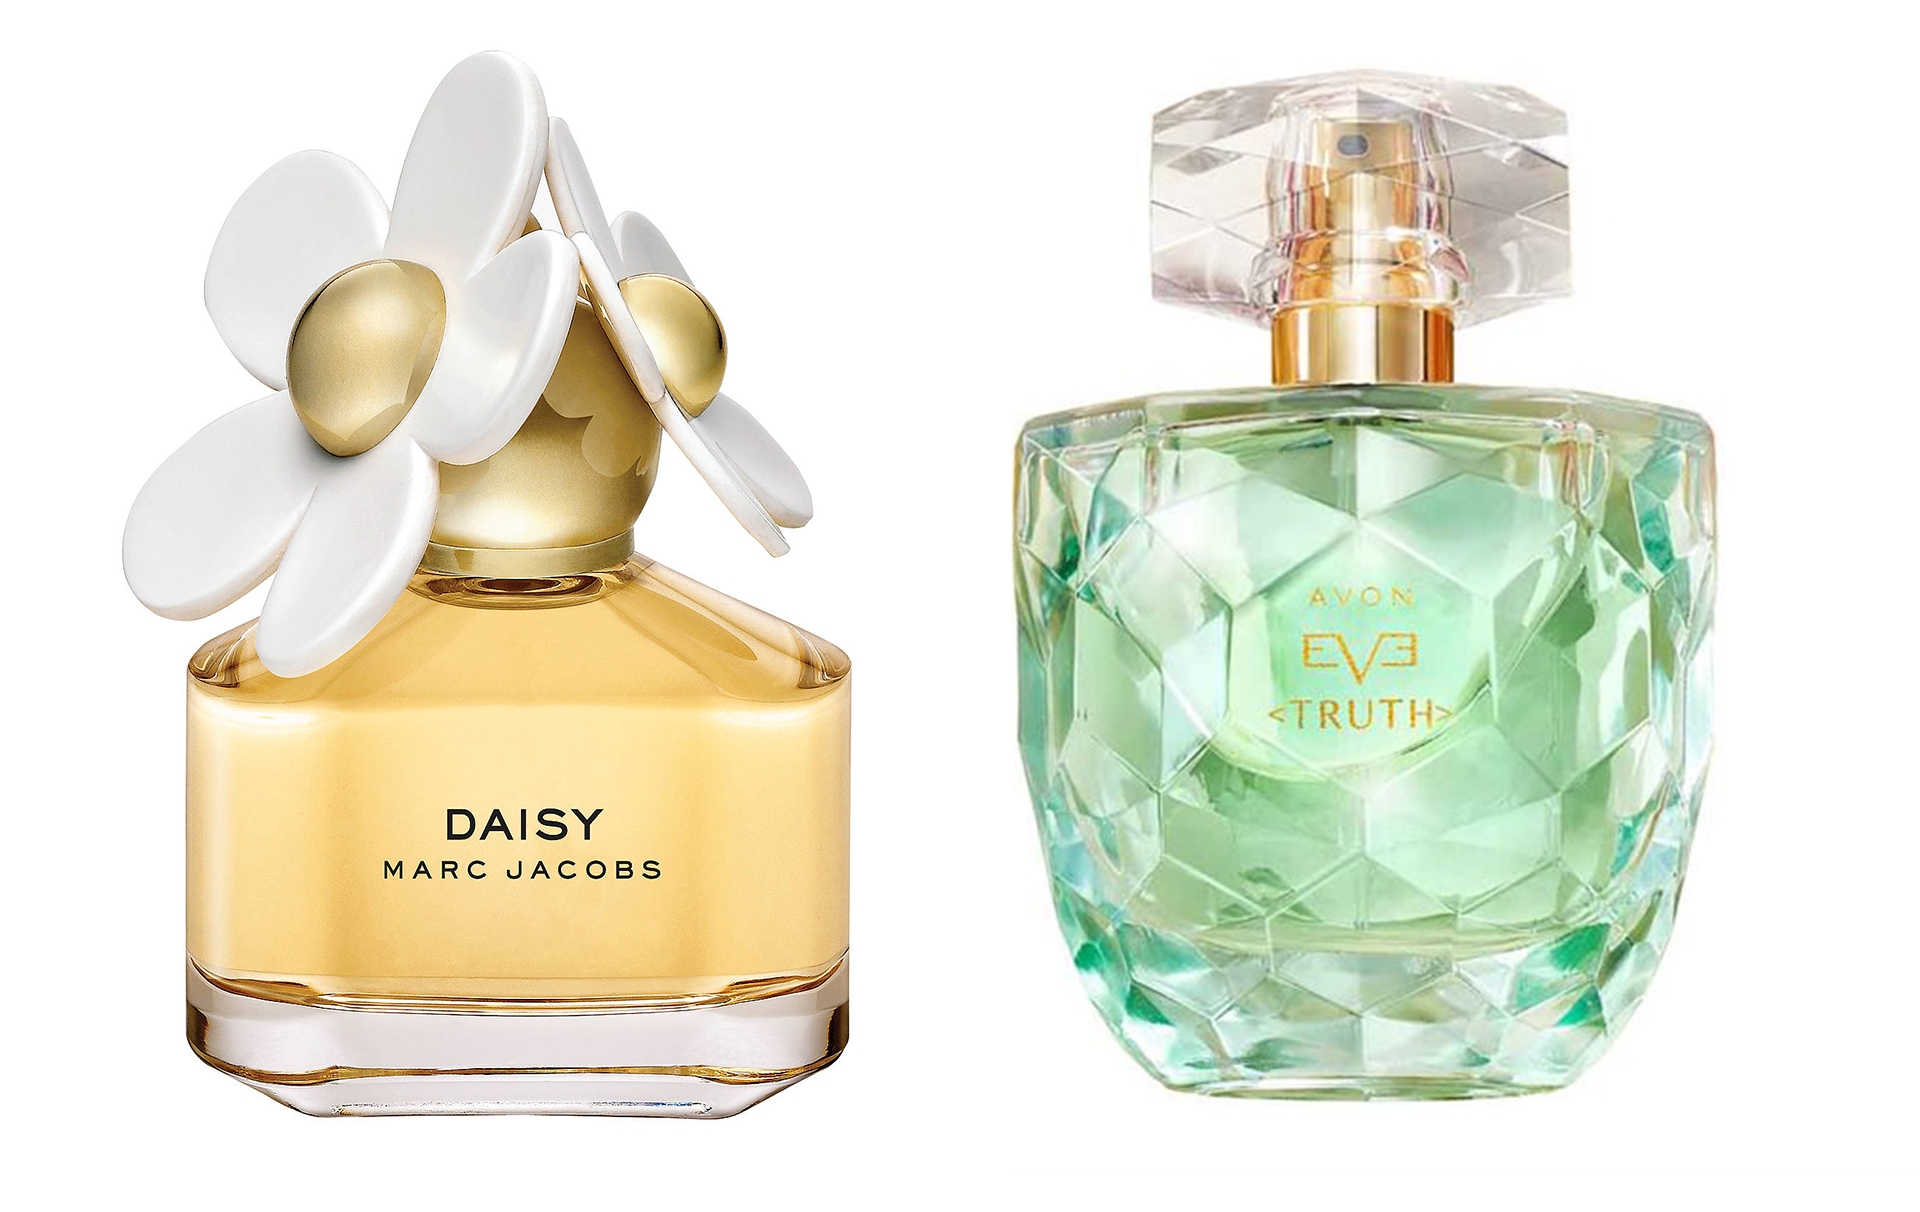 Top 25 Cheapest Perfume Dupes Smelt Exactly Like Designer Scents